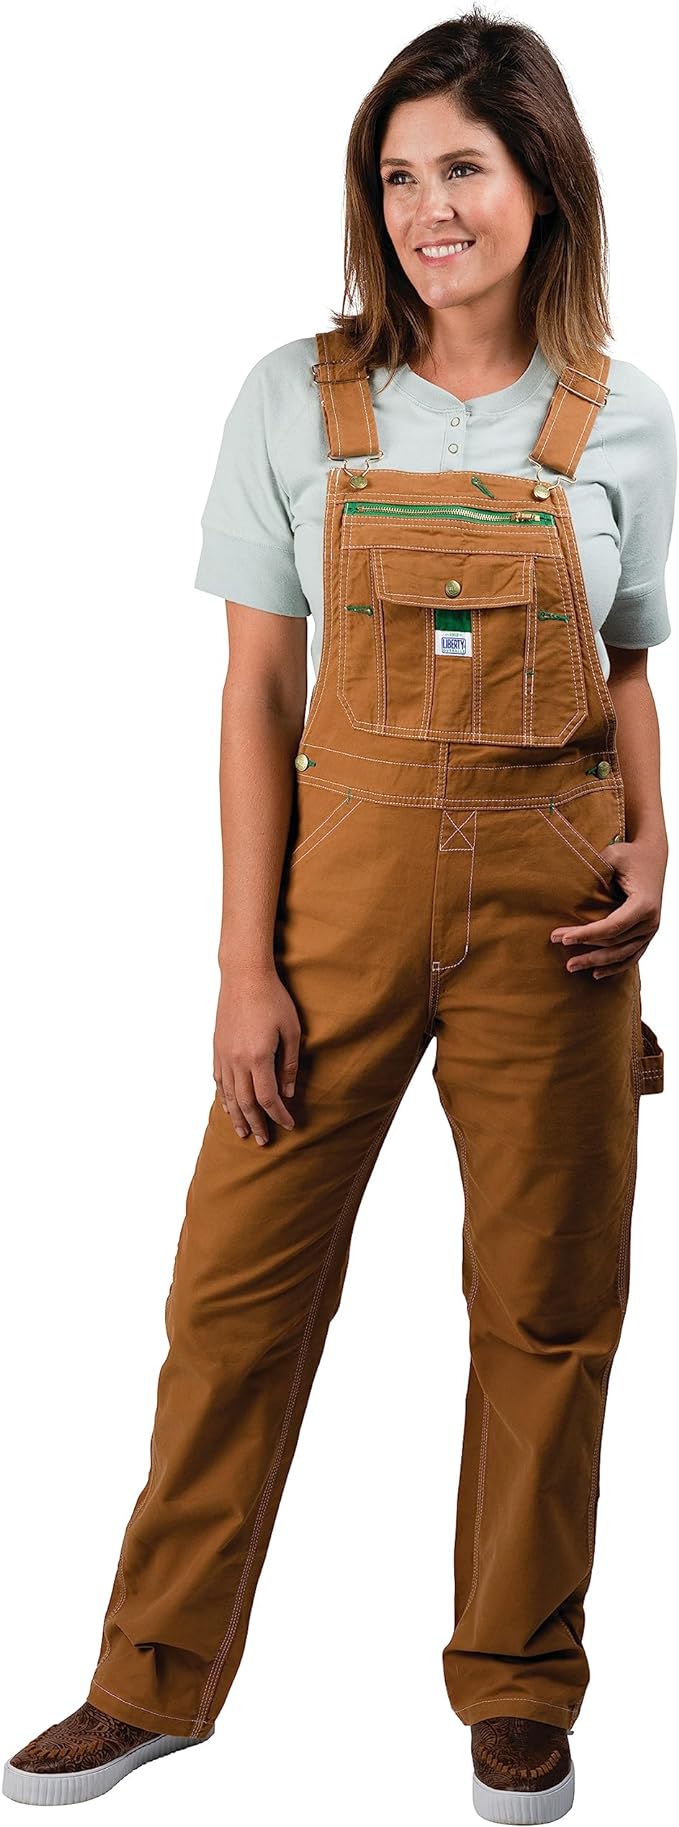 Liberty Women's Washed Brown Duck Bib Overalls